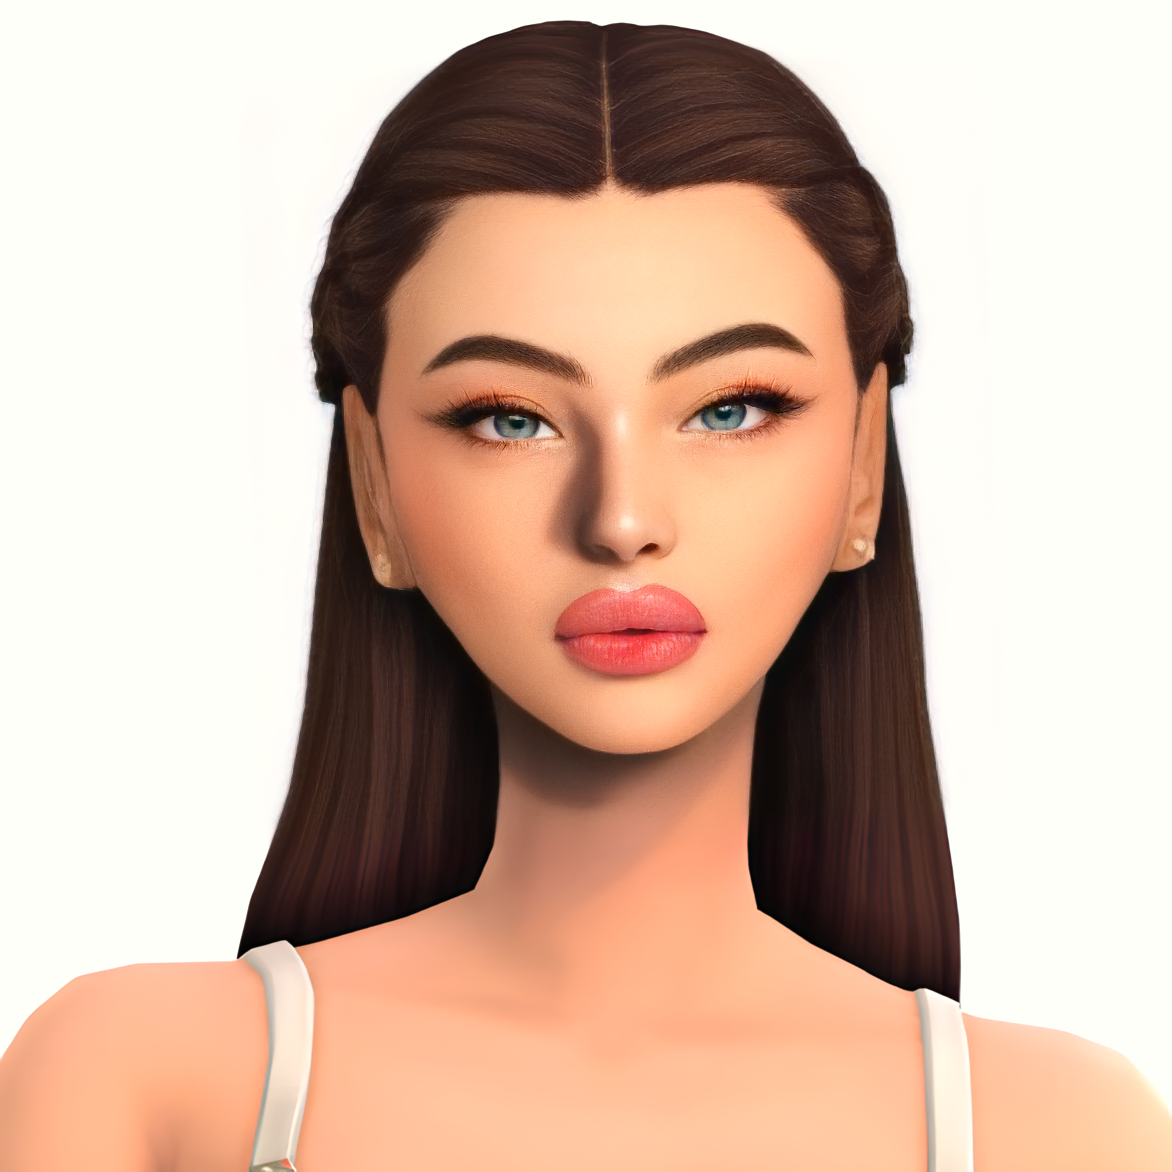 Sherry Hutchins - The Sims 4 Sims / Households - CurseForge